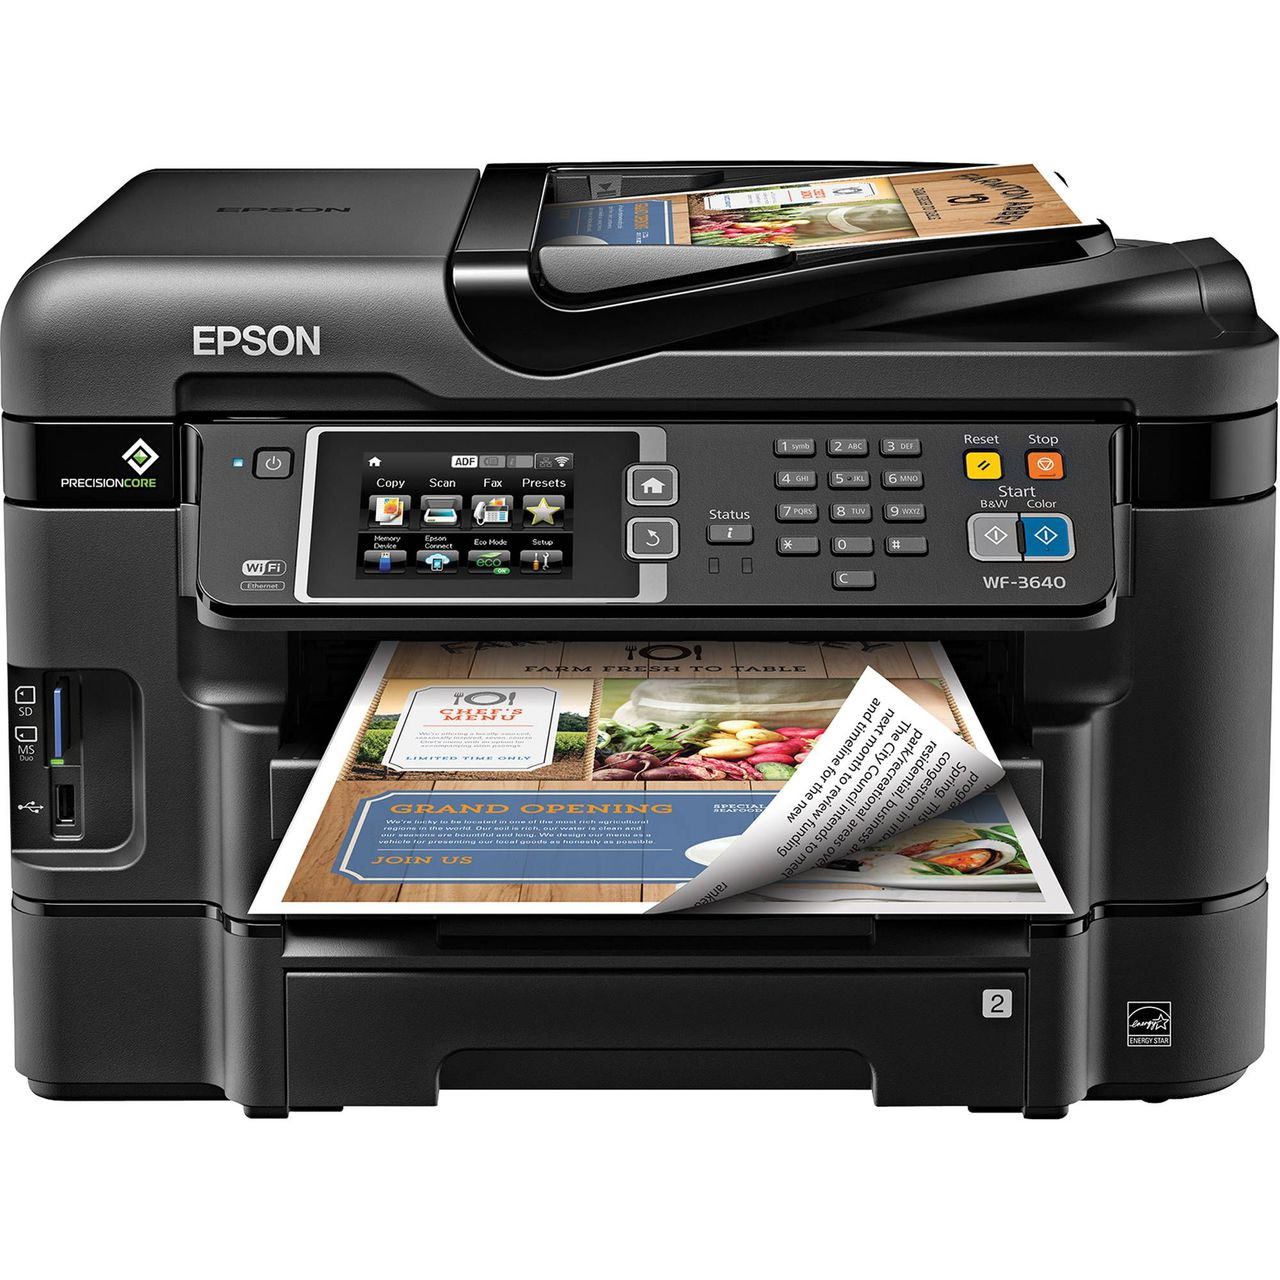 Epson Workforce Wf 2650 All In One Wireless Color Printer With Scanner Copier And Fax 4612